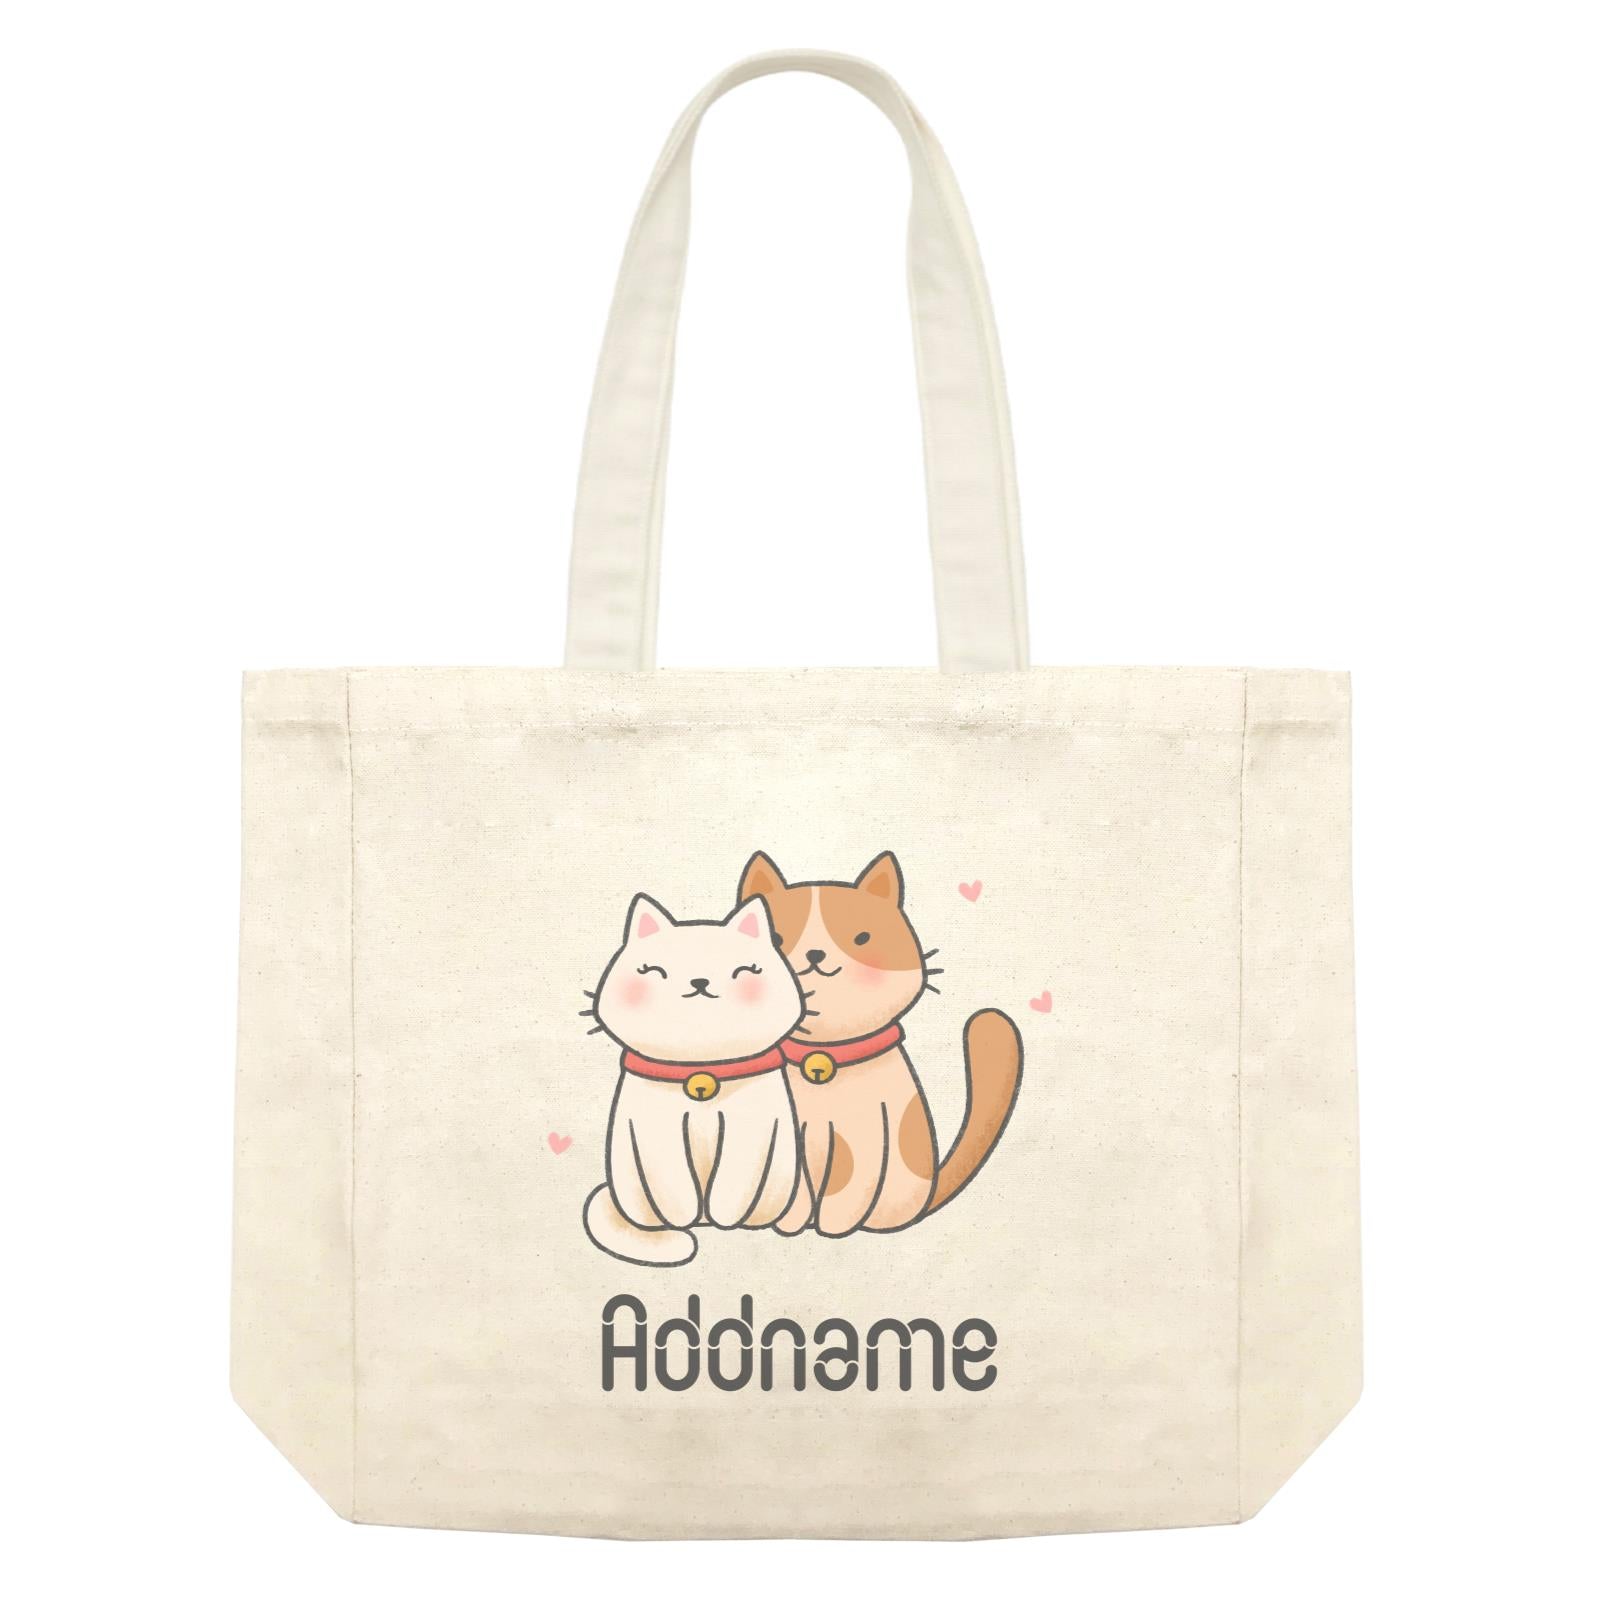 Cute Hand Drawn Style Couple Cat Addname Shopping Bag